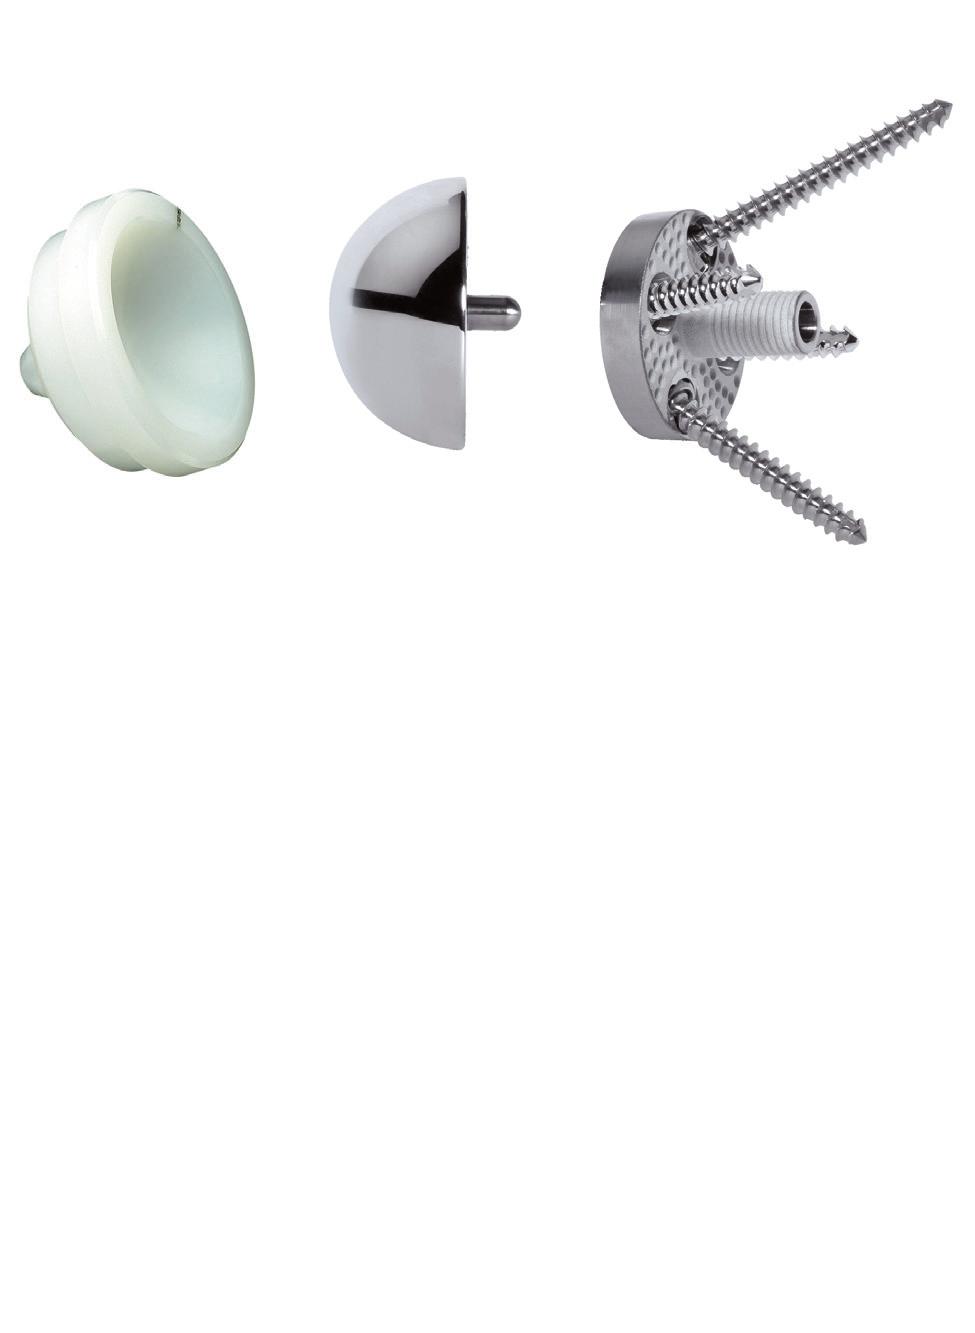 The Glenoid Sphere Available in 4 diameters: 33, 36, 39 and 42 mm.